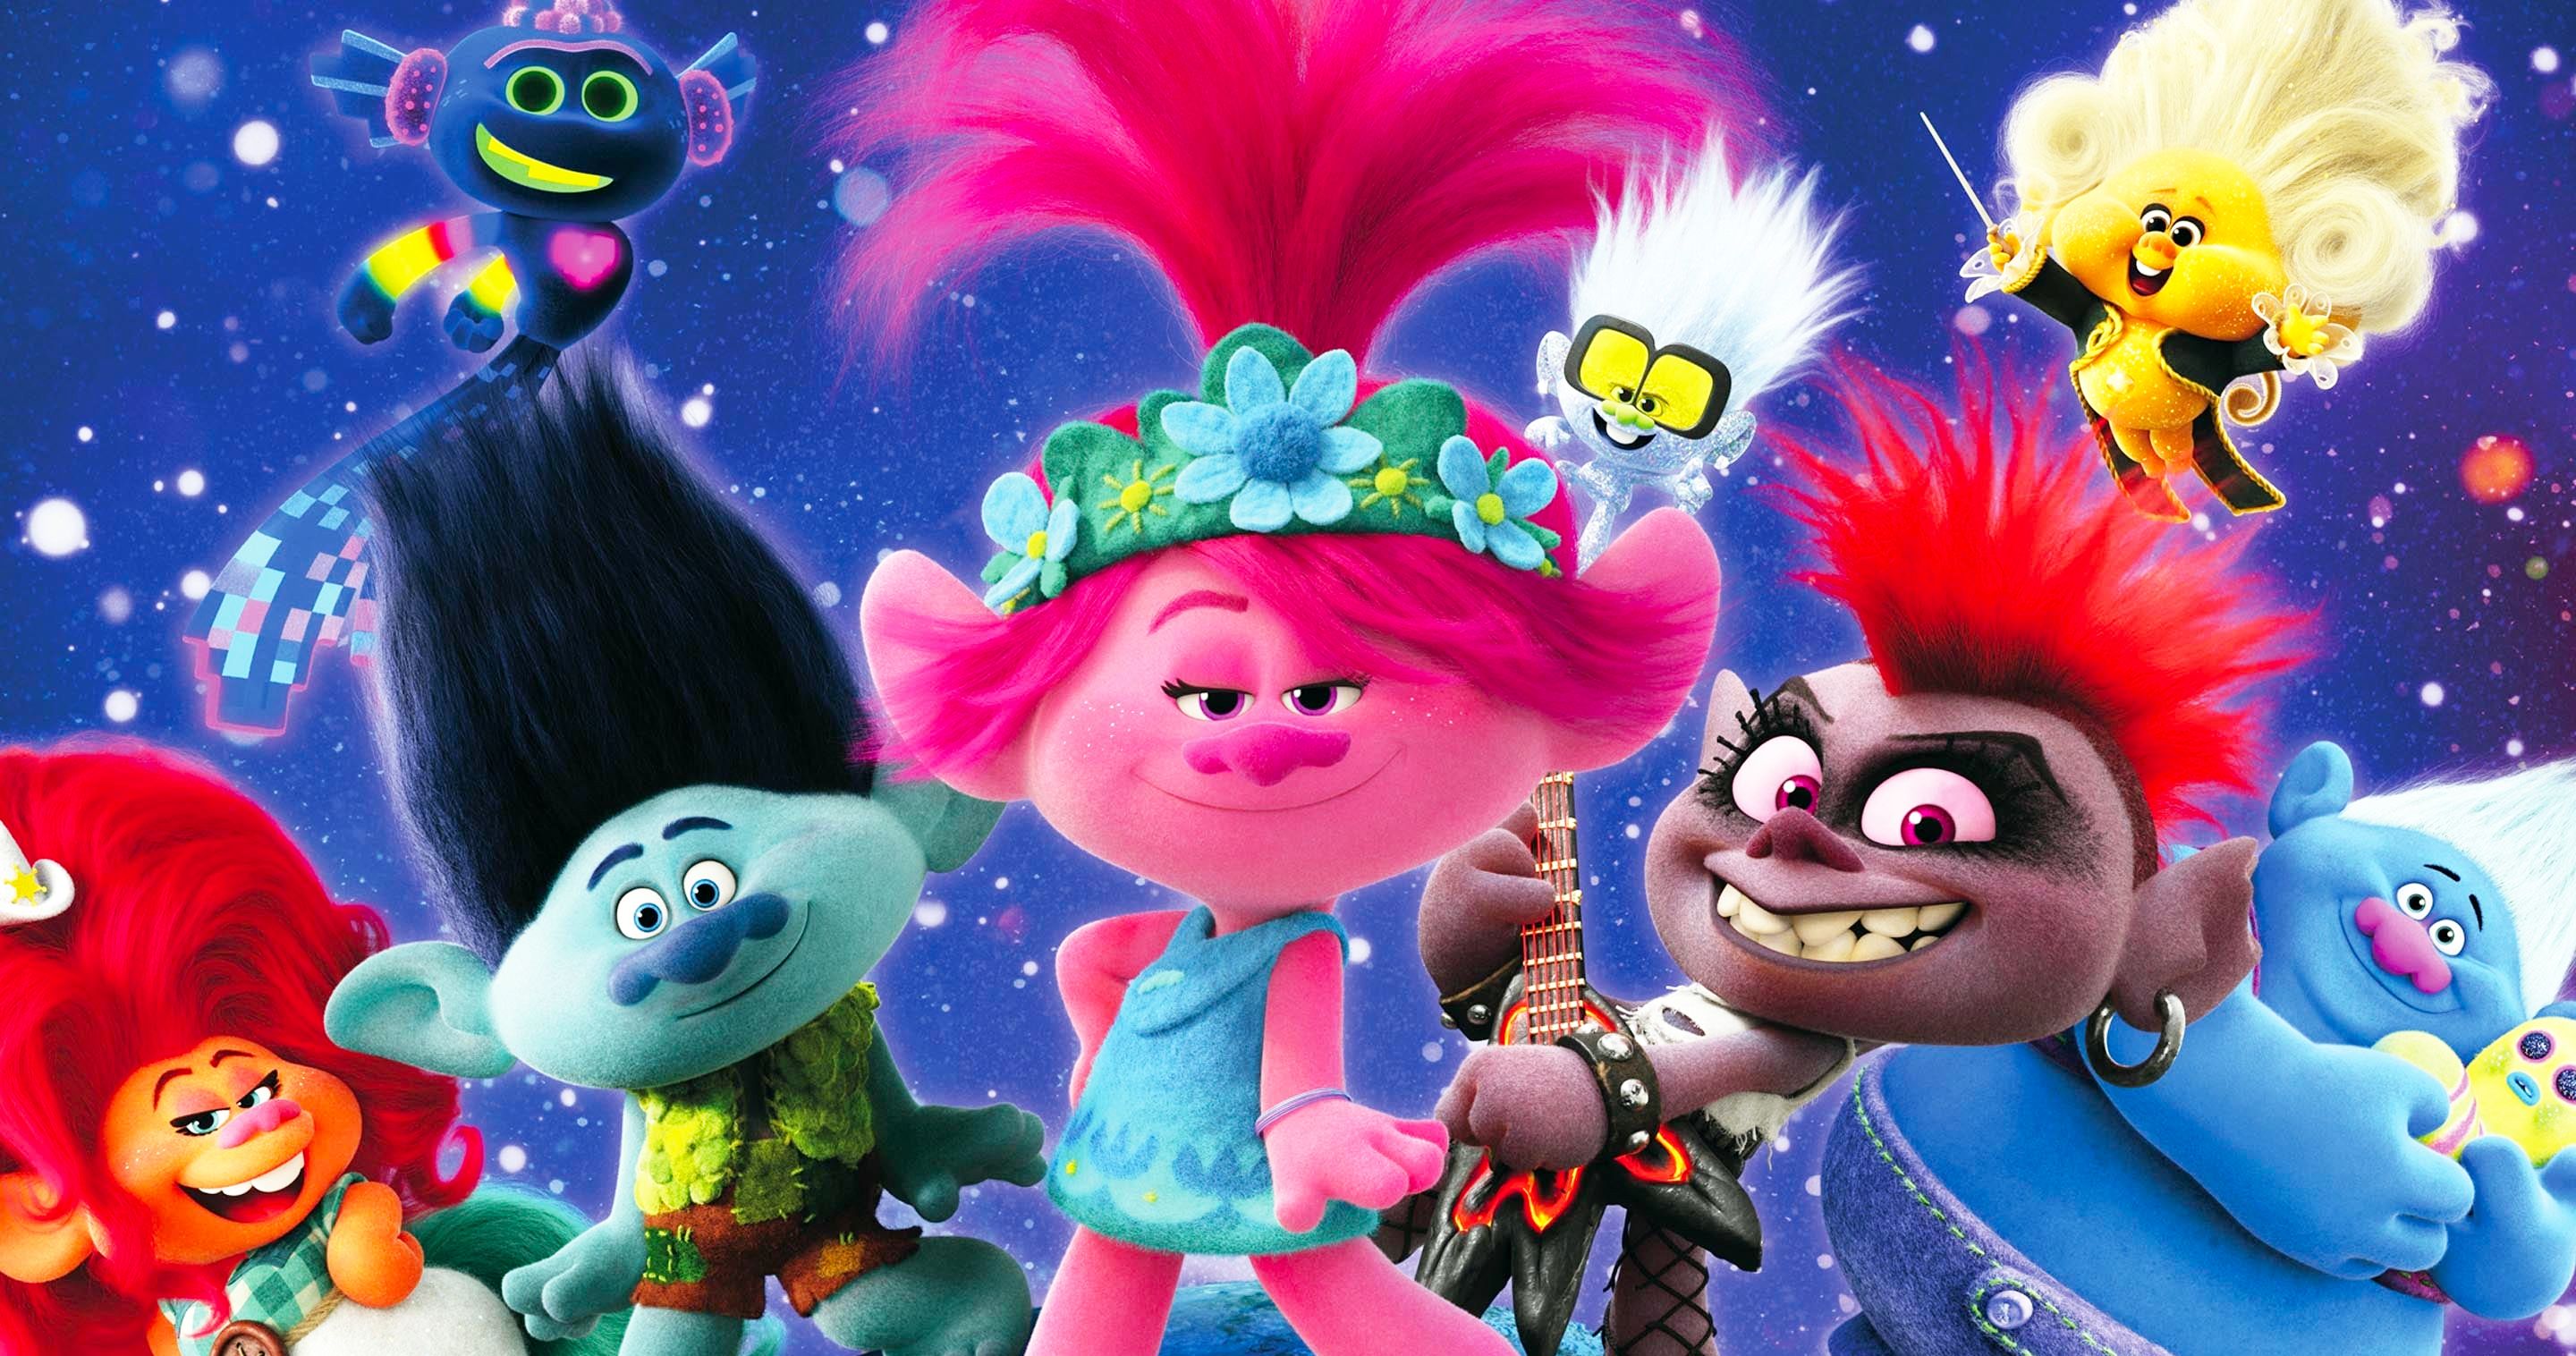 Trolls World Tour Review: A Welcome Song and Dance Diversion